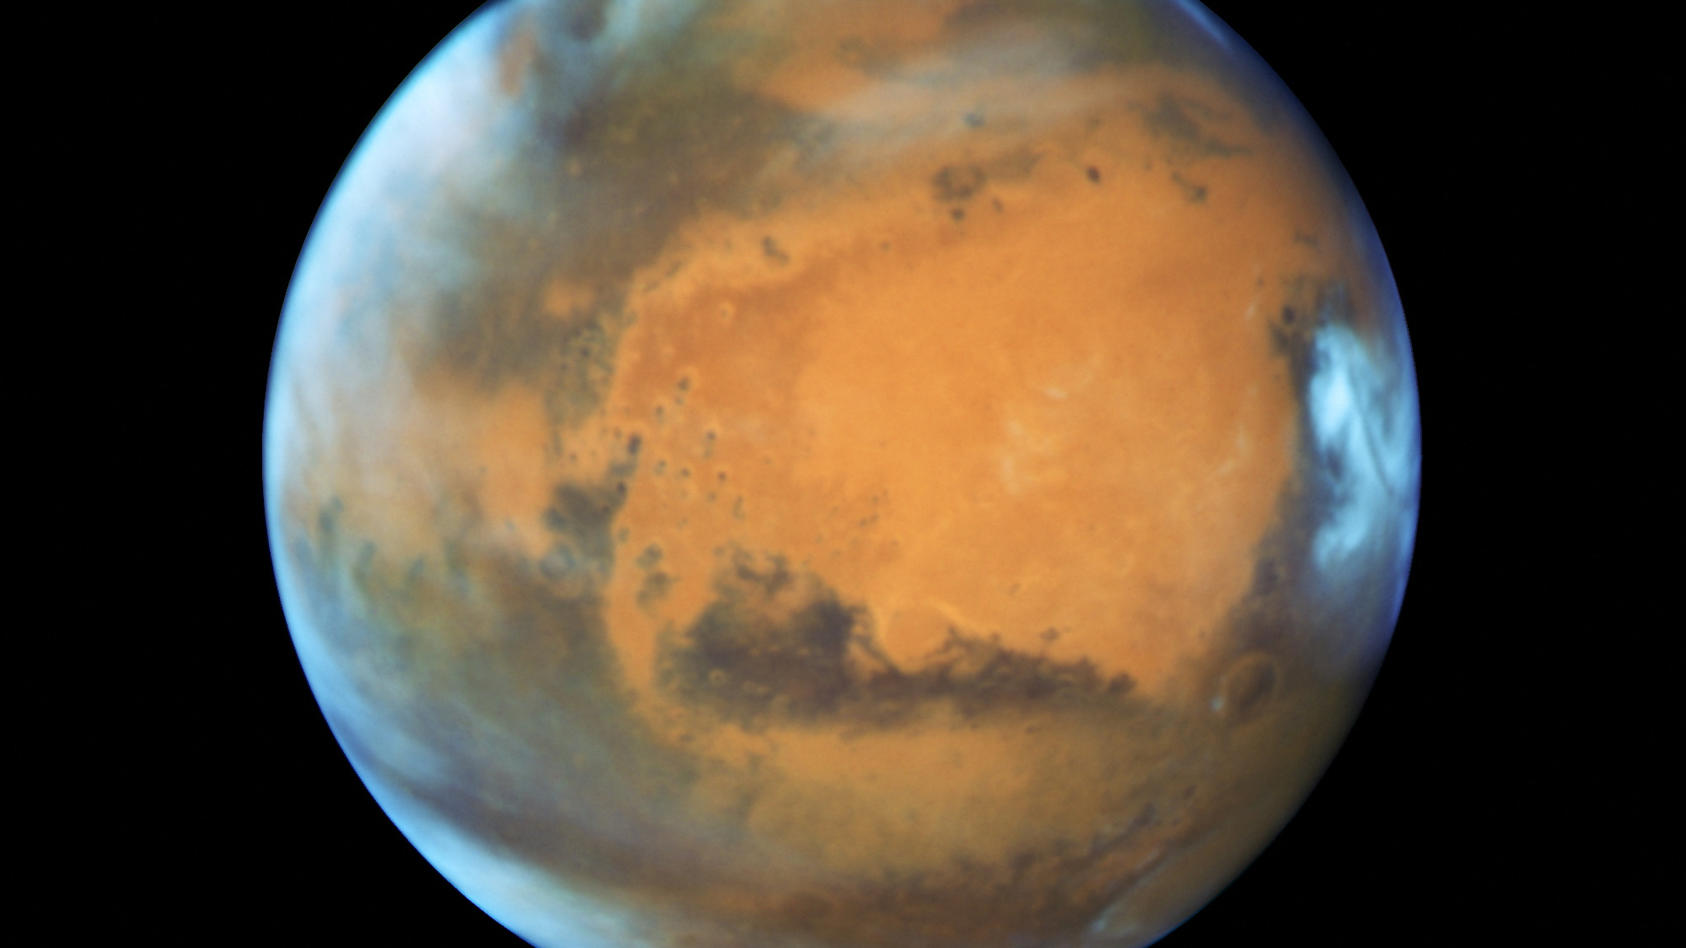 Life on the Red Planet: The river view suggests the existence of life on Mars